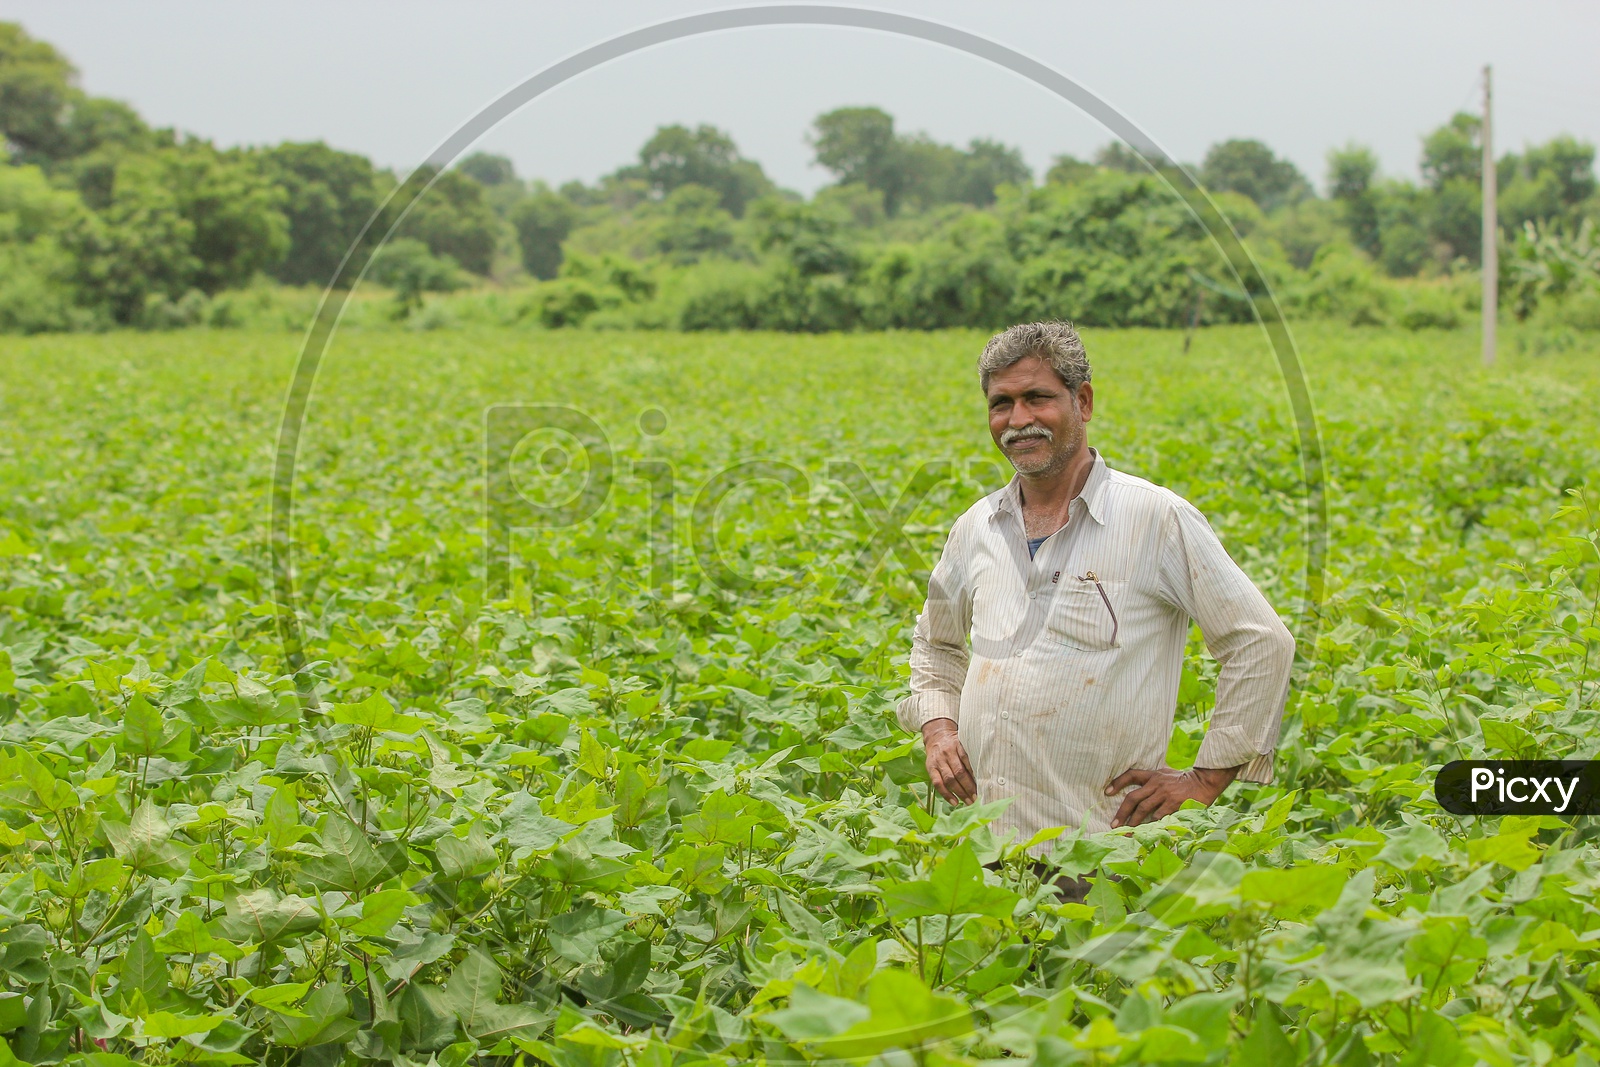 An Indian Farmer in Cotton Field and Smiling